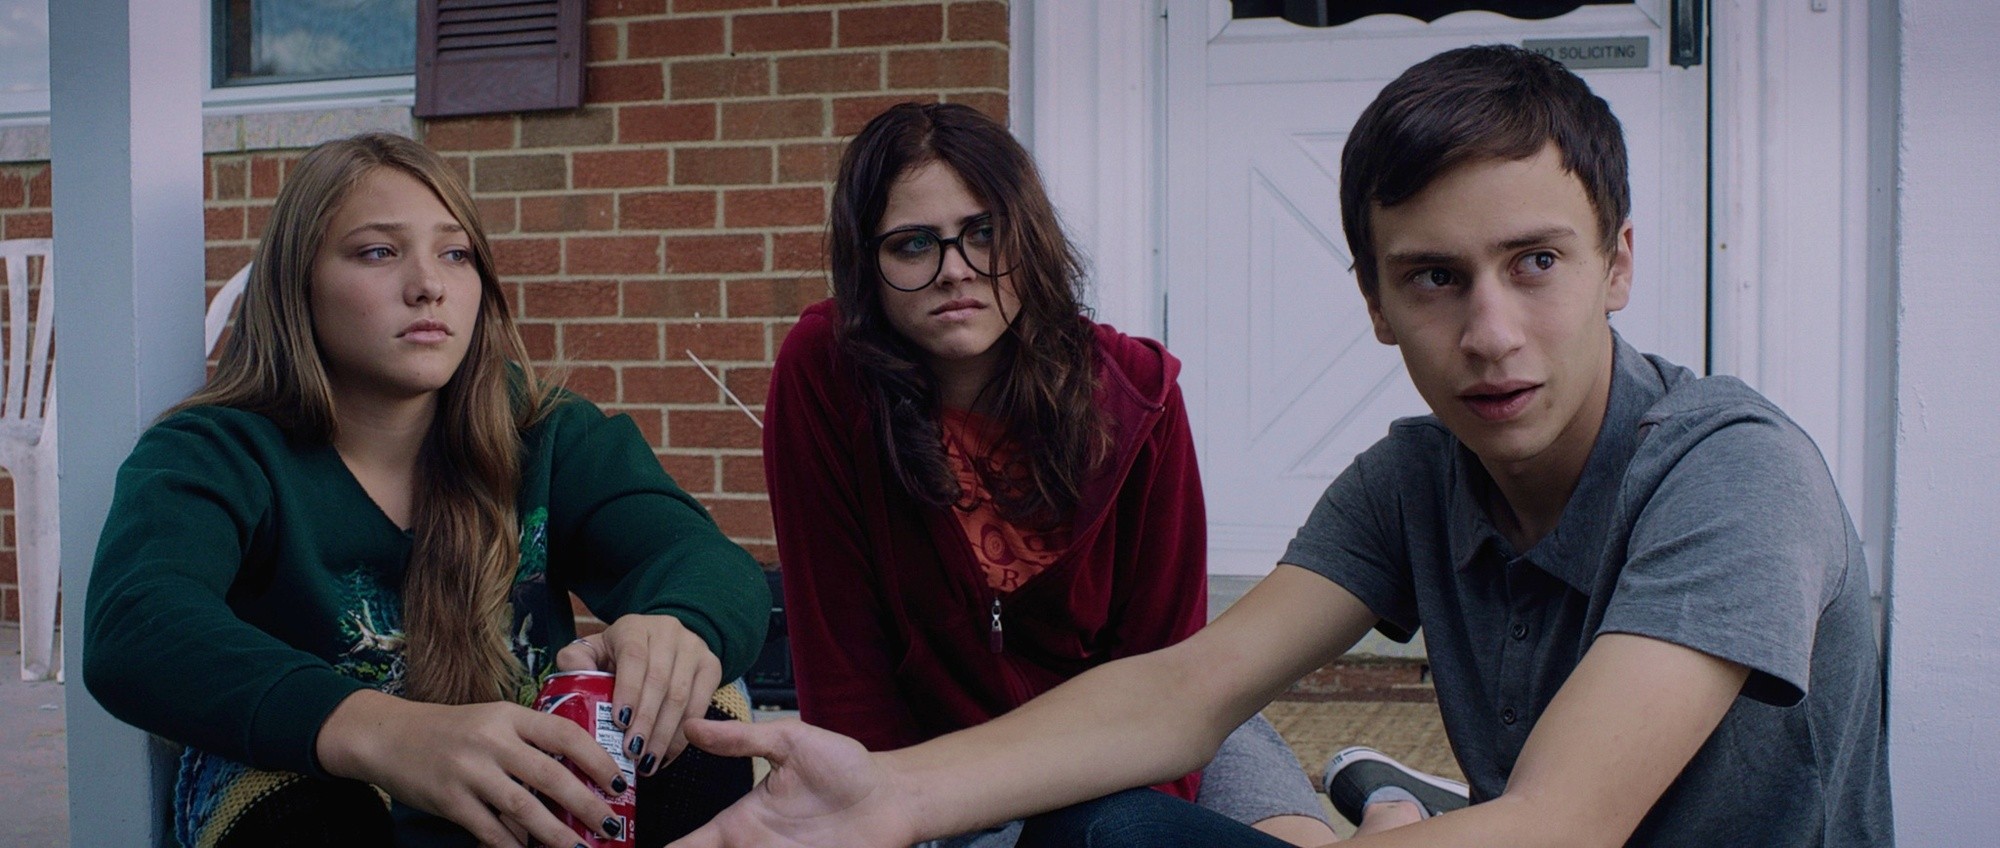 Lili Sepe stars as Kelly and Keir Gilchrist stars as Paul in RADiUS-TWC's It Follows (2015)